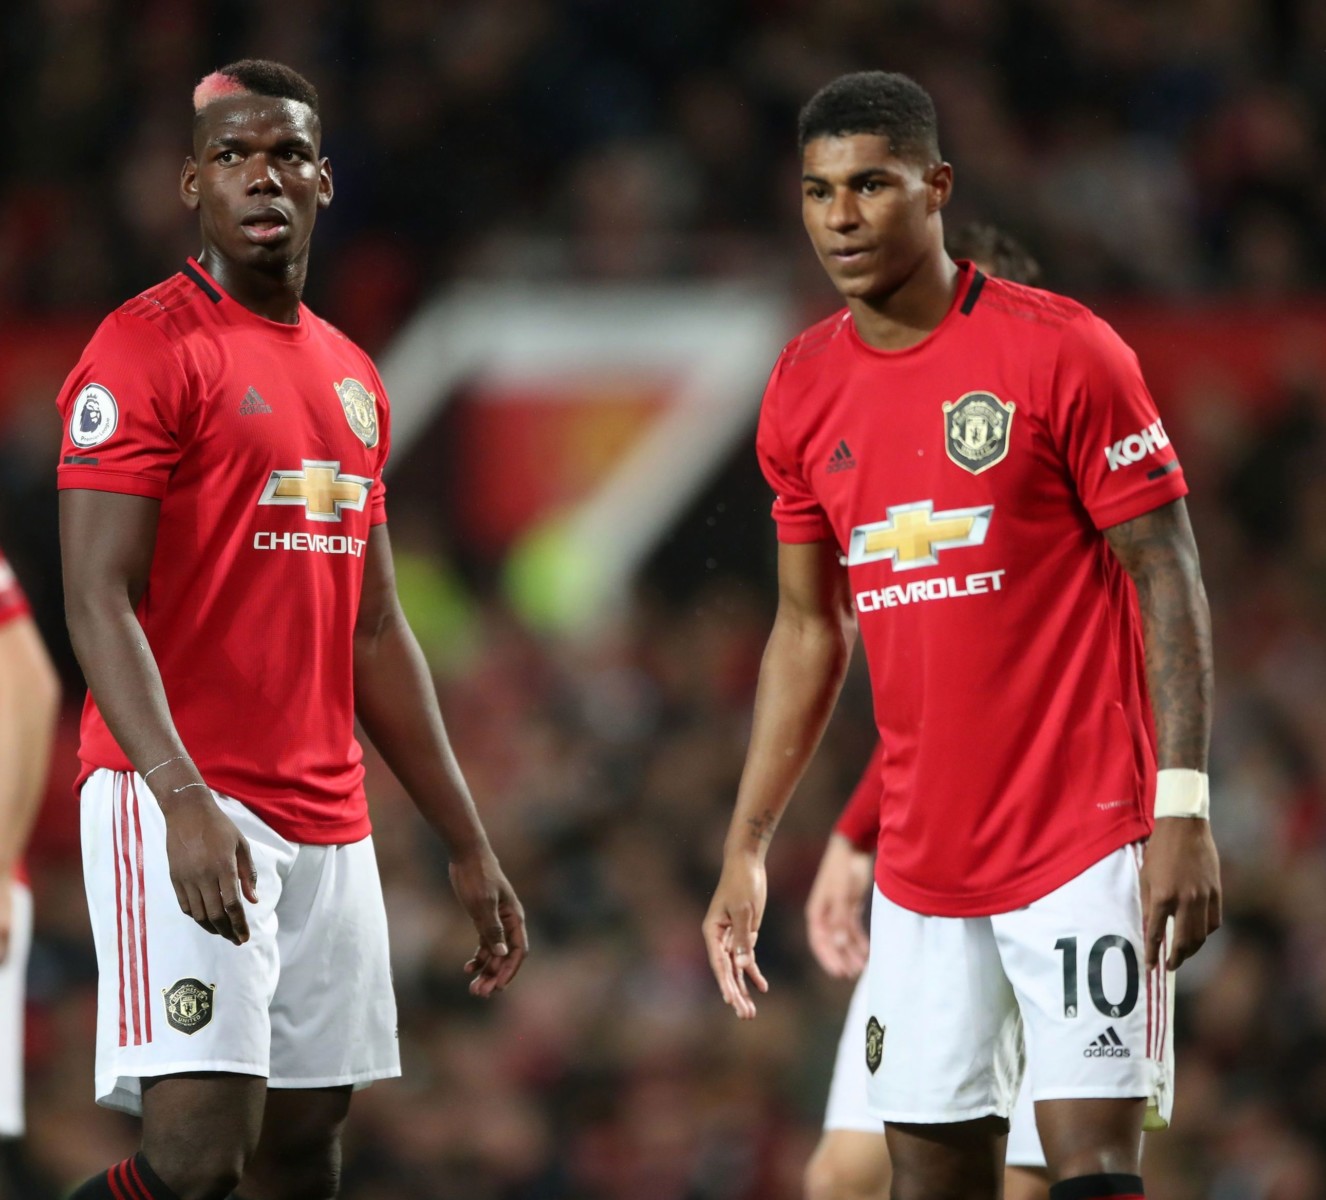 Marcus Rashford and Pogba have 51 goals between them when lining up together 122 times for the Red Devils